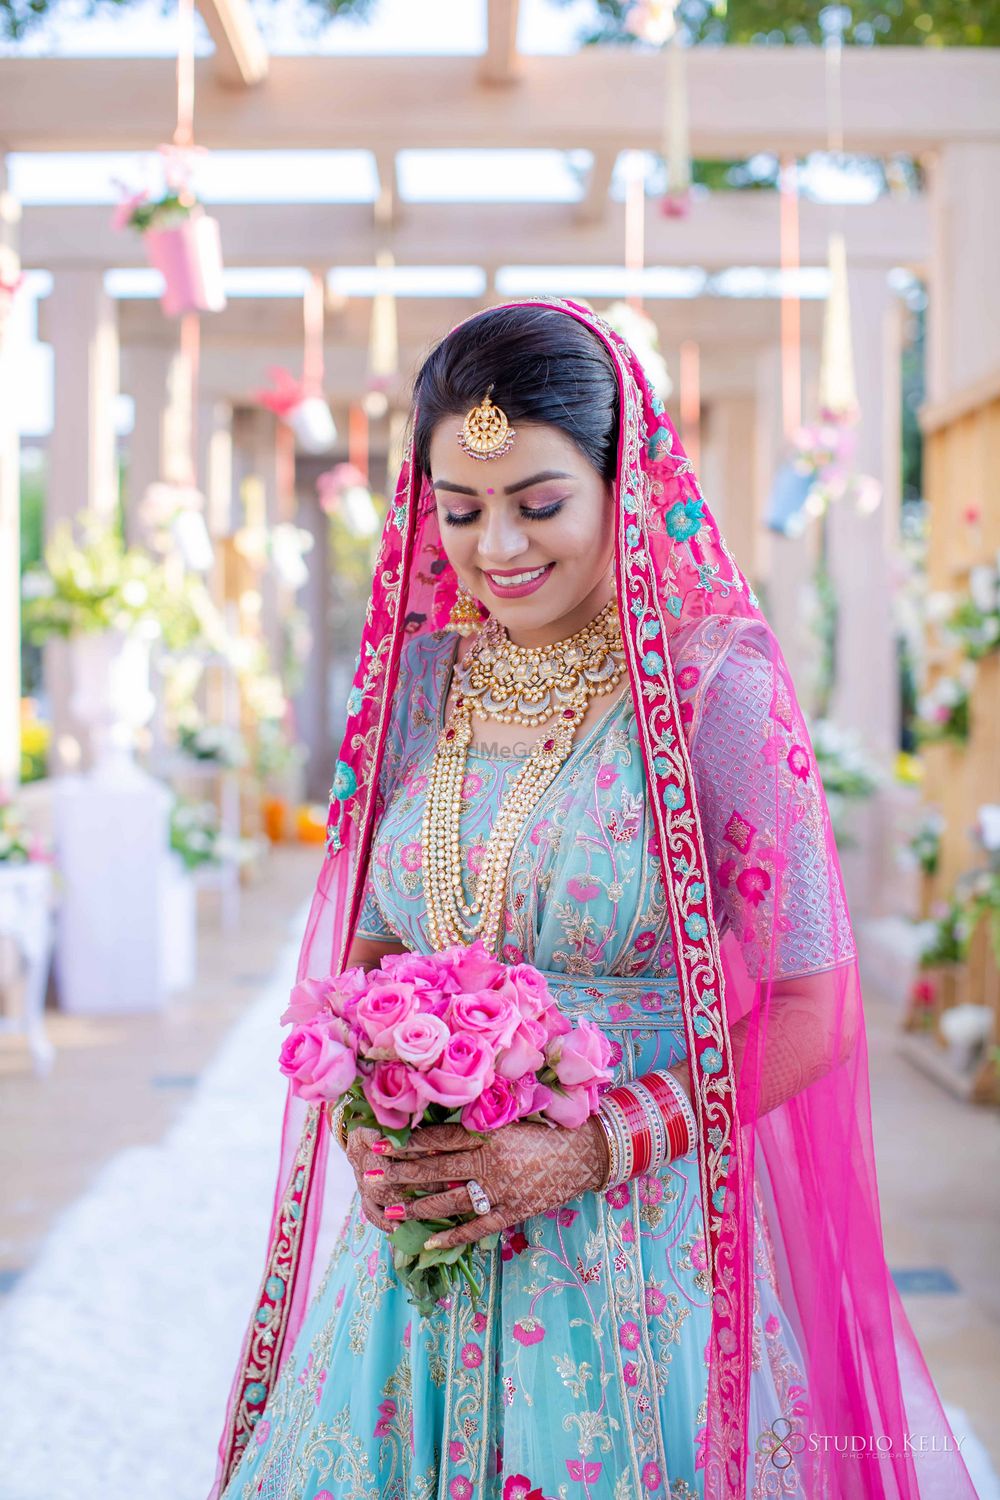 Photo of sikh bride in offbeat outfit holding a bouquet